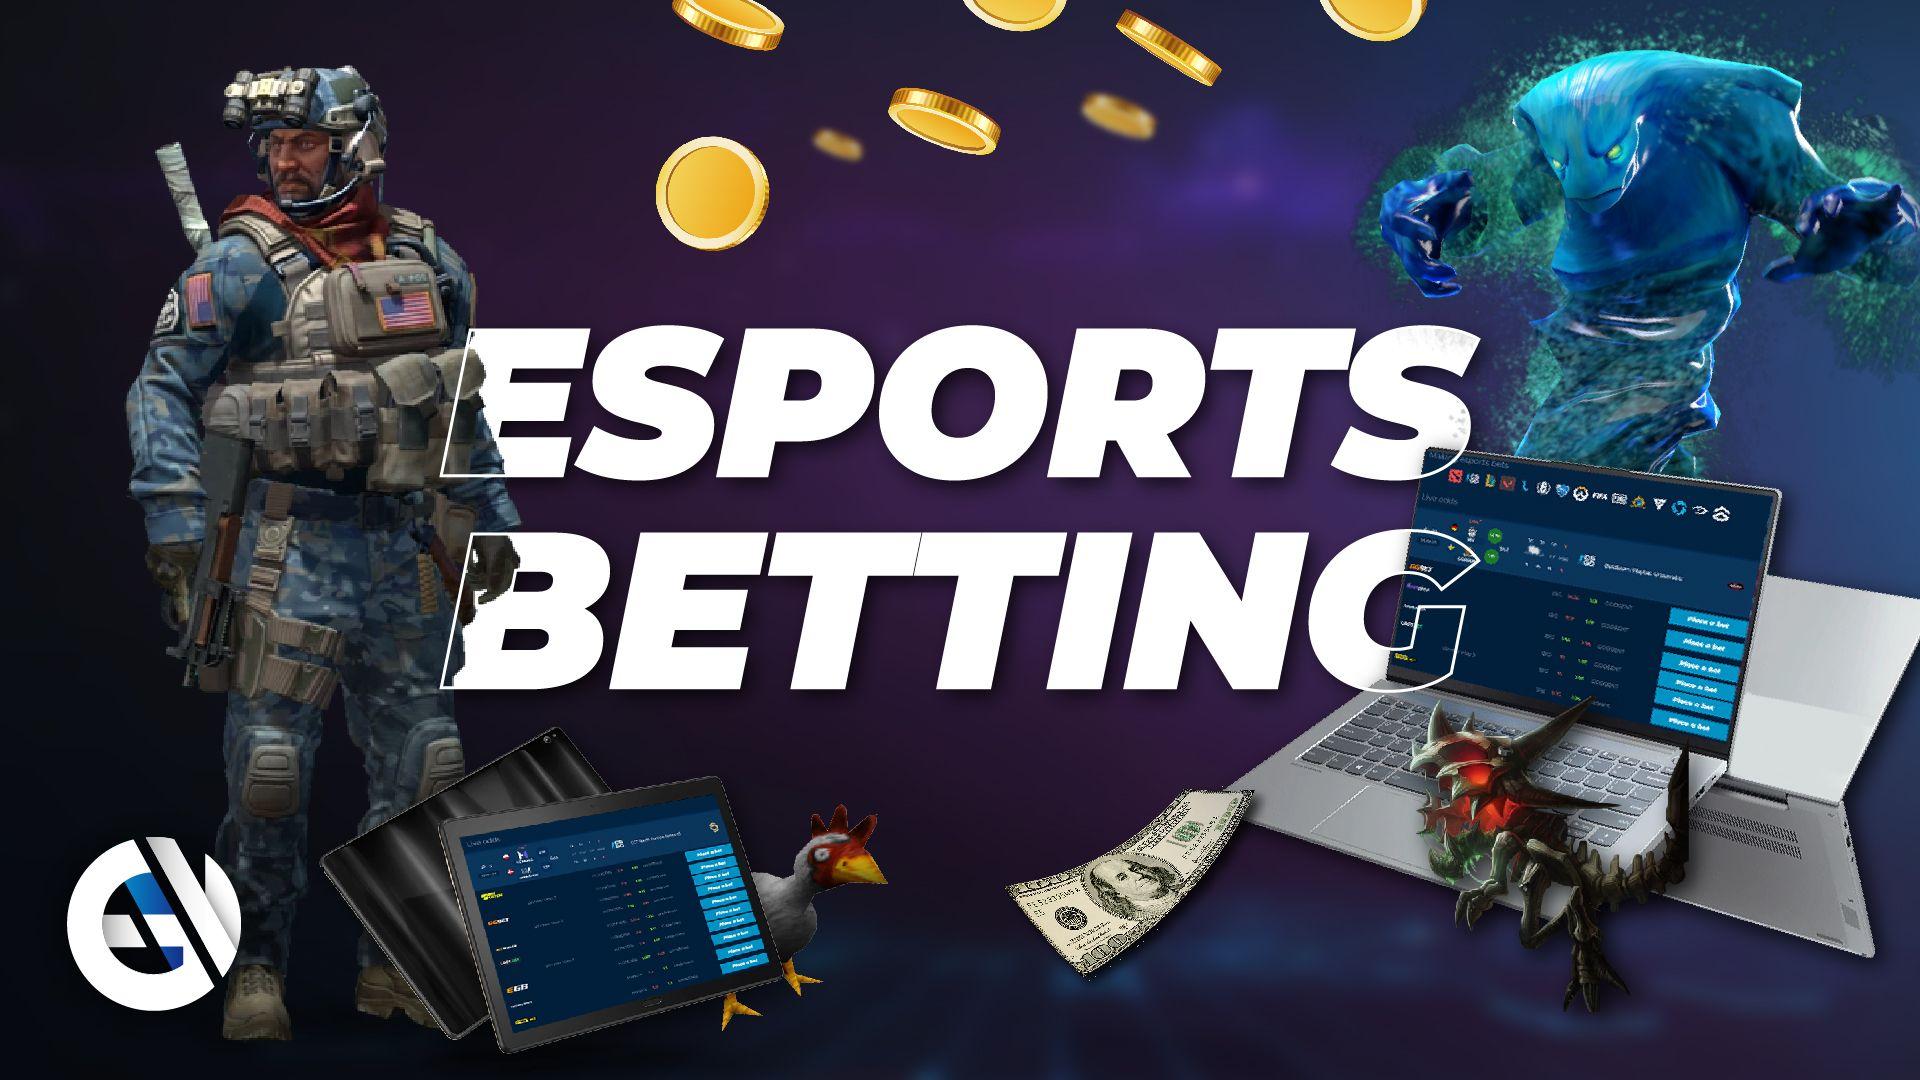 eSports Tournament Betting: the fastest growing segment in sports betting